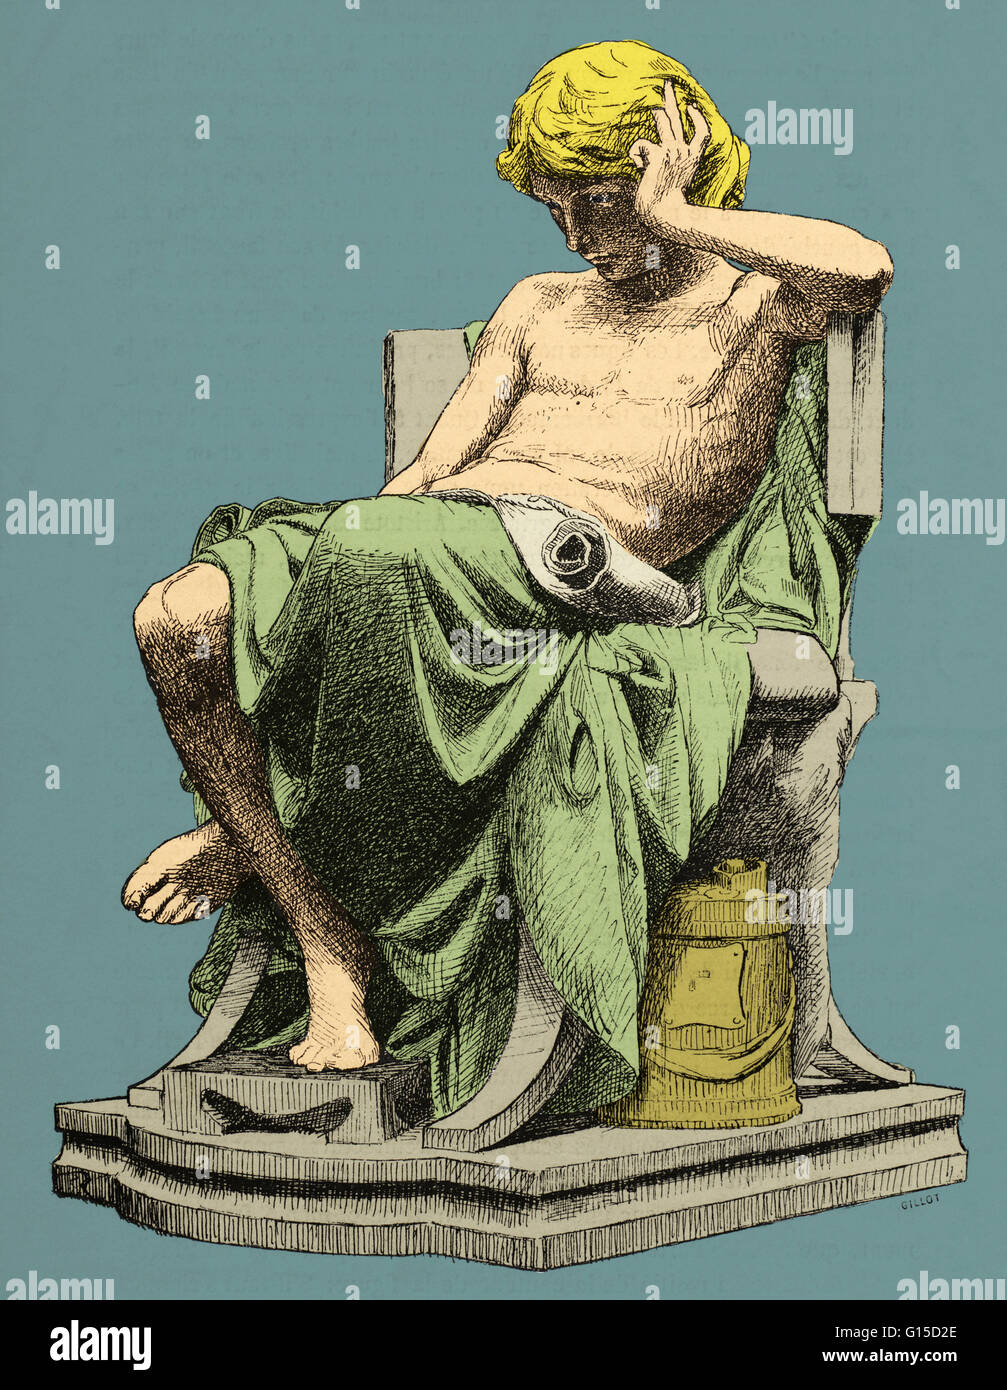 Illustration of Charles DeGeorge's 'La Jeunesse d'Aristotle' (Aristotle's Youth), a marble sculpture from 1875. Aristotle (384 - 322 BC) was an ancient Greek philosopher, polymath, student of Plato and teacher of Alexander the Great. His writings cover ma Stock Photo